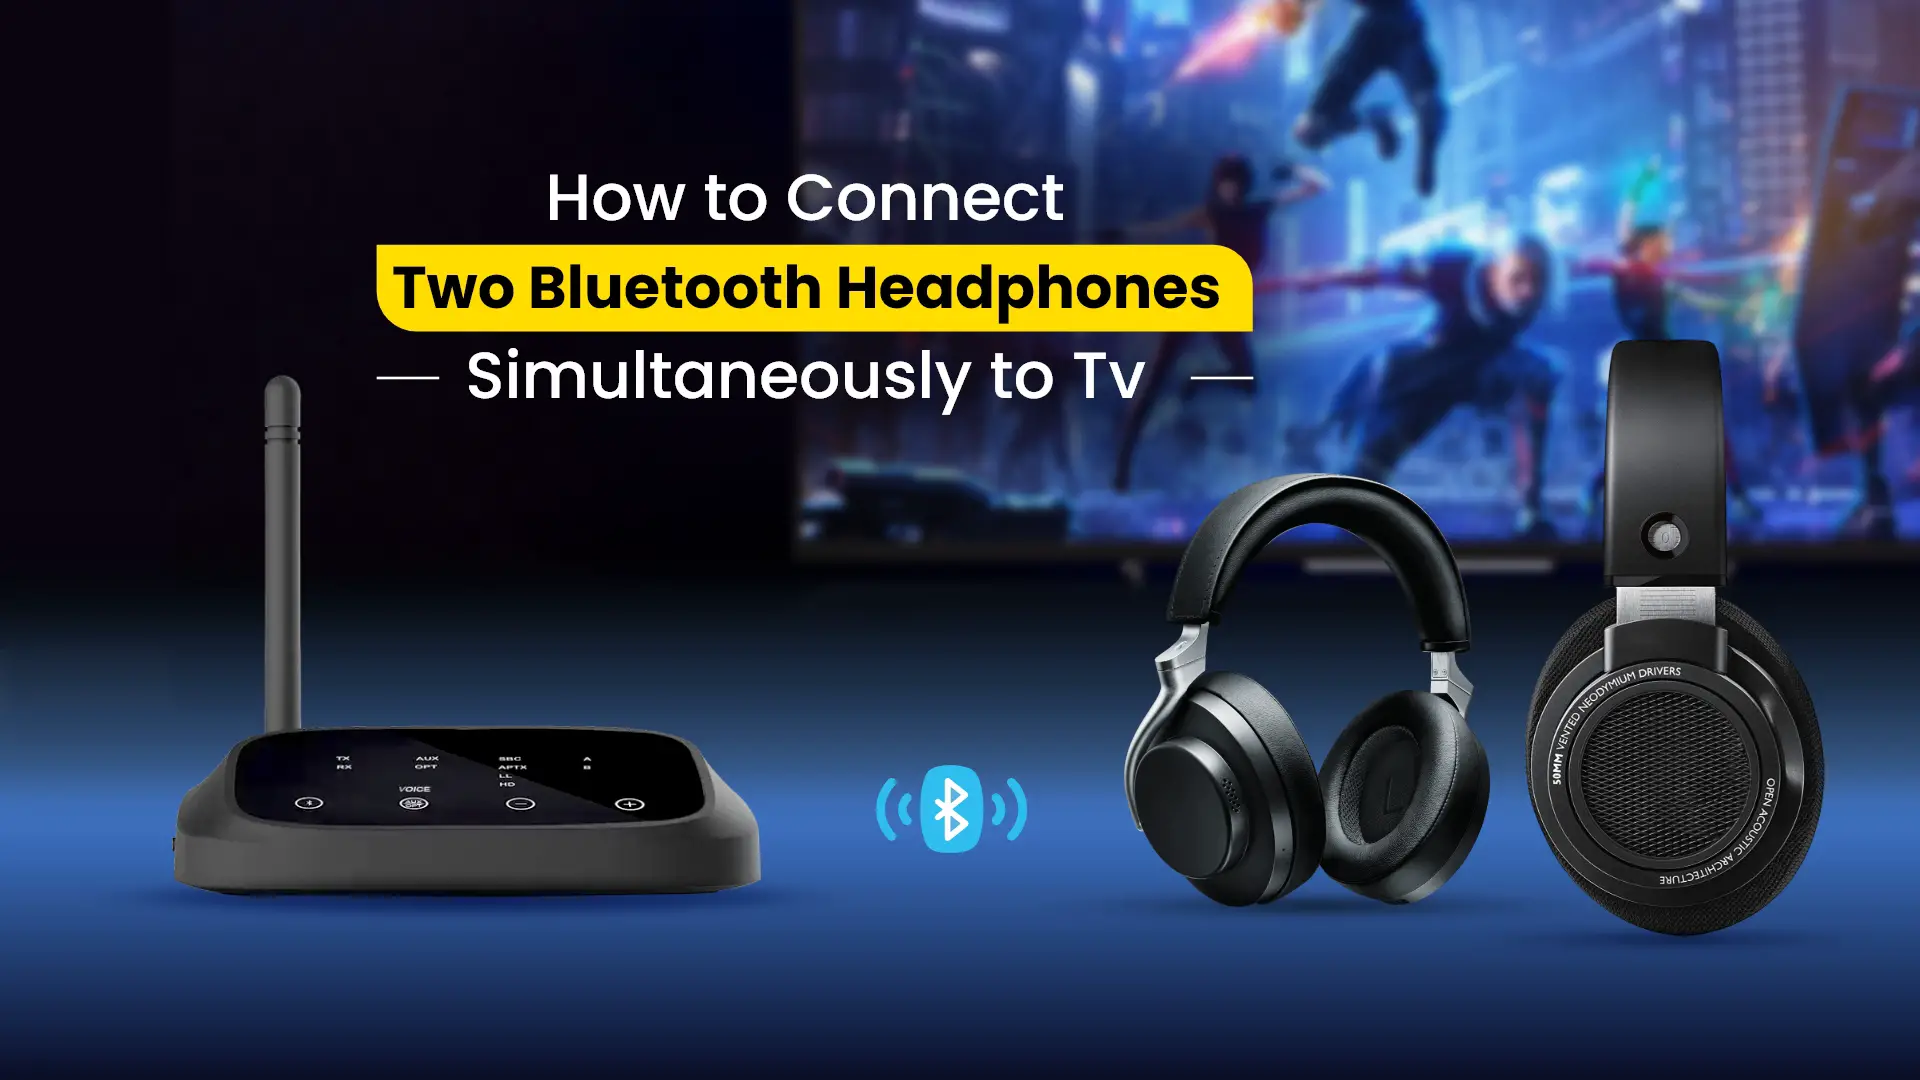 How to Connect Two Headphones to TV - Apple TV, Samsung TV, Others Techtouchy